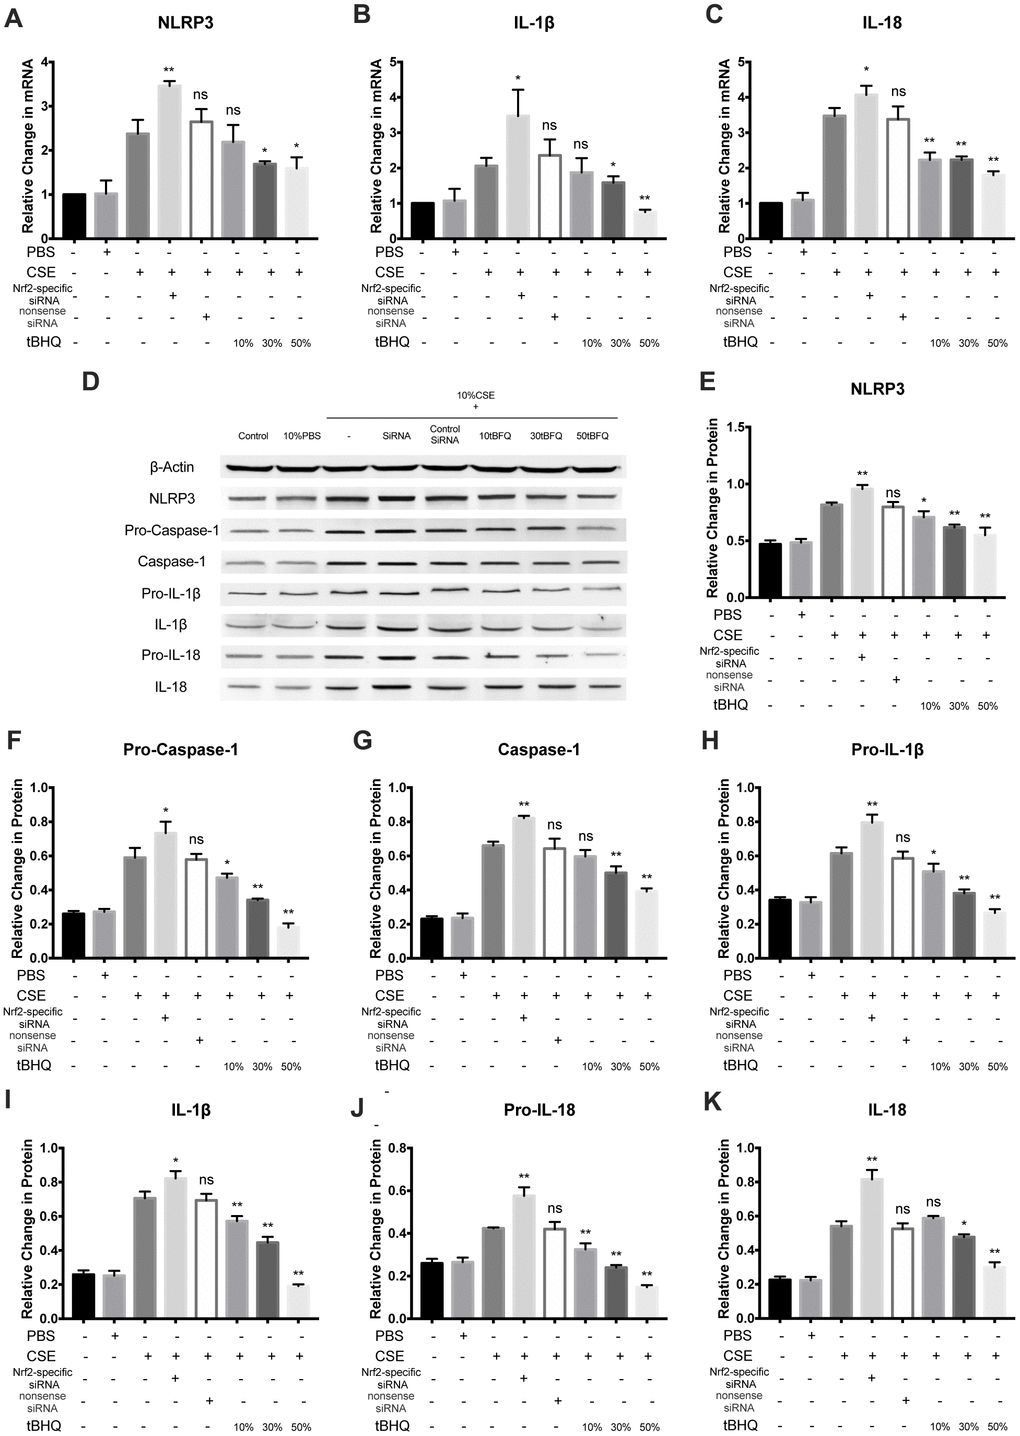 Nrf2 negatively regulated CSE-induced NLRP3 inflammasome activation. (A–C) The mRNA level of NLRP3, IL-1β and IL-18 was detected by RT-PCR. (D–K) NLRP3, Pro-Caspase-1, Caspase-1, Pro-IL-1β, IL-1β, Pro-IL-18 and IL-18 were detected by Western blot. *p p ns, not significant, compared with CSE group. The data are represented as mean ± SD (n = 3).